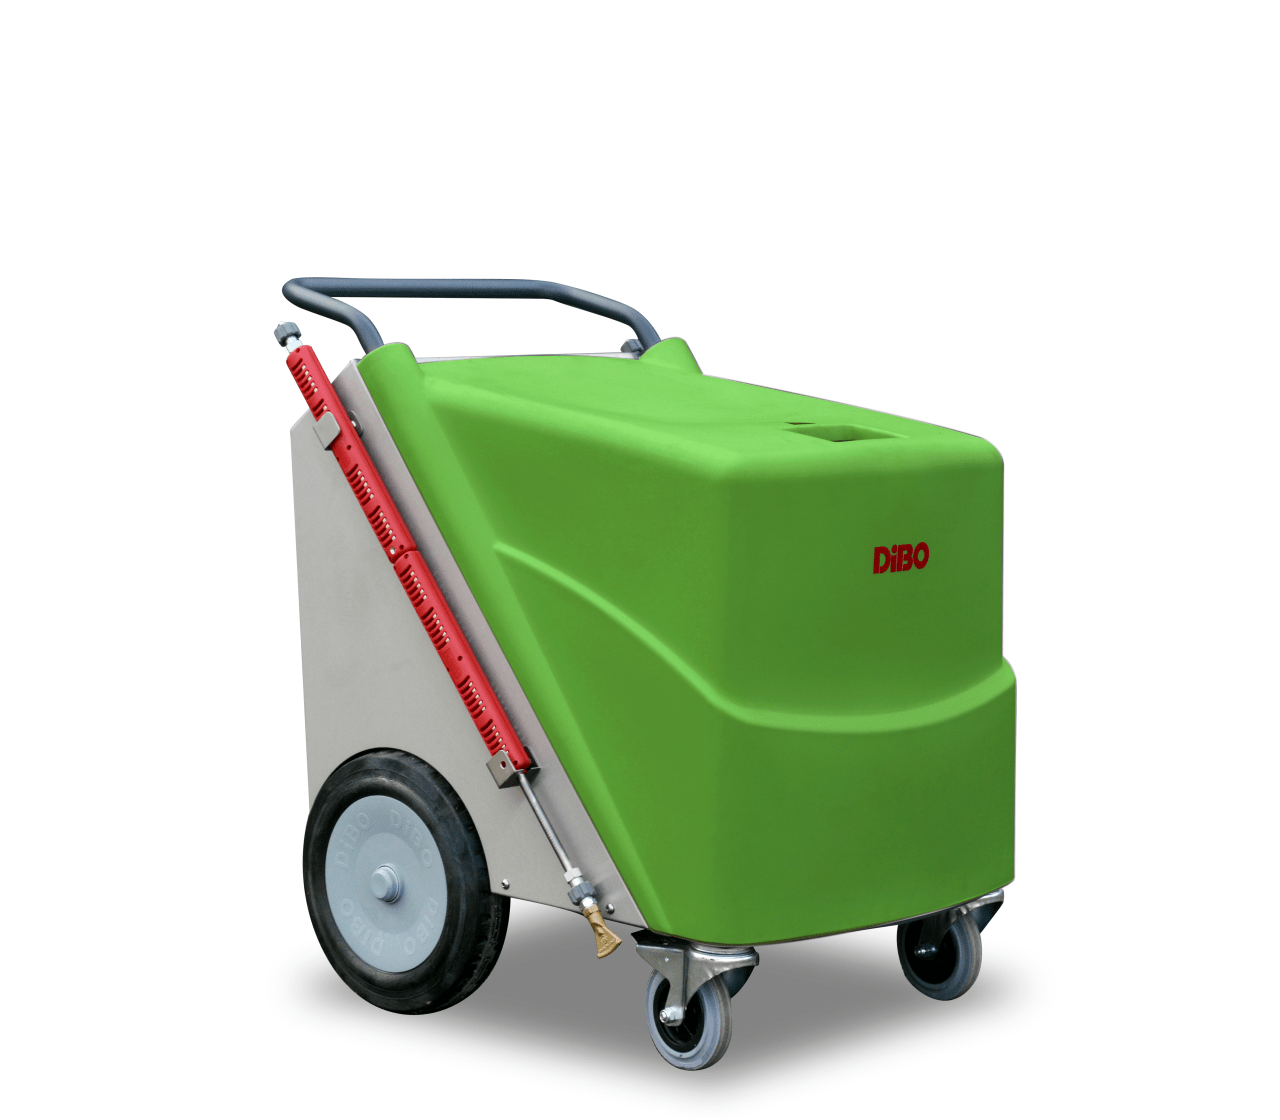 DiBO HOTBOX-GK 50/10 the smallest mobile hot water high-pressure cleaner with standard steam function and anti-scaling system